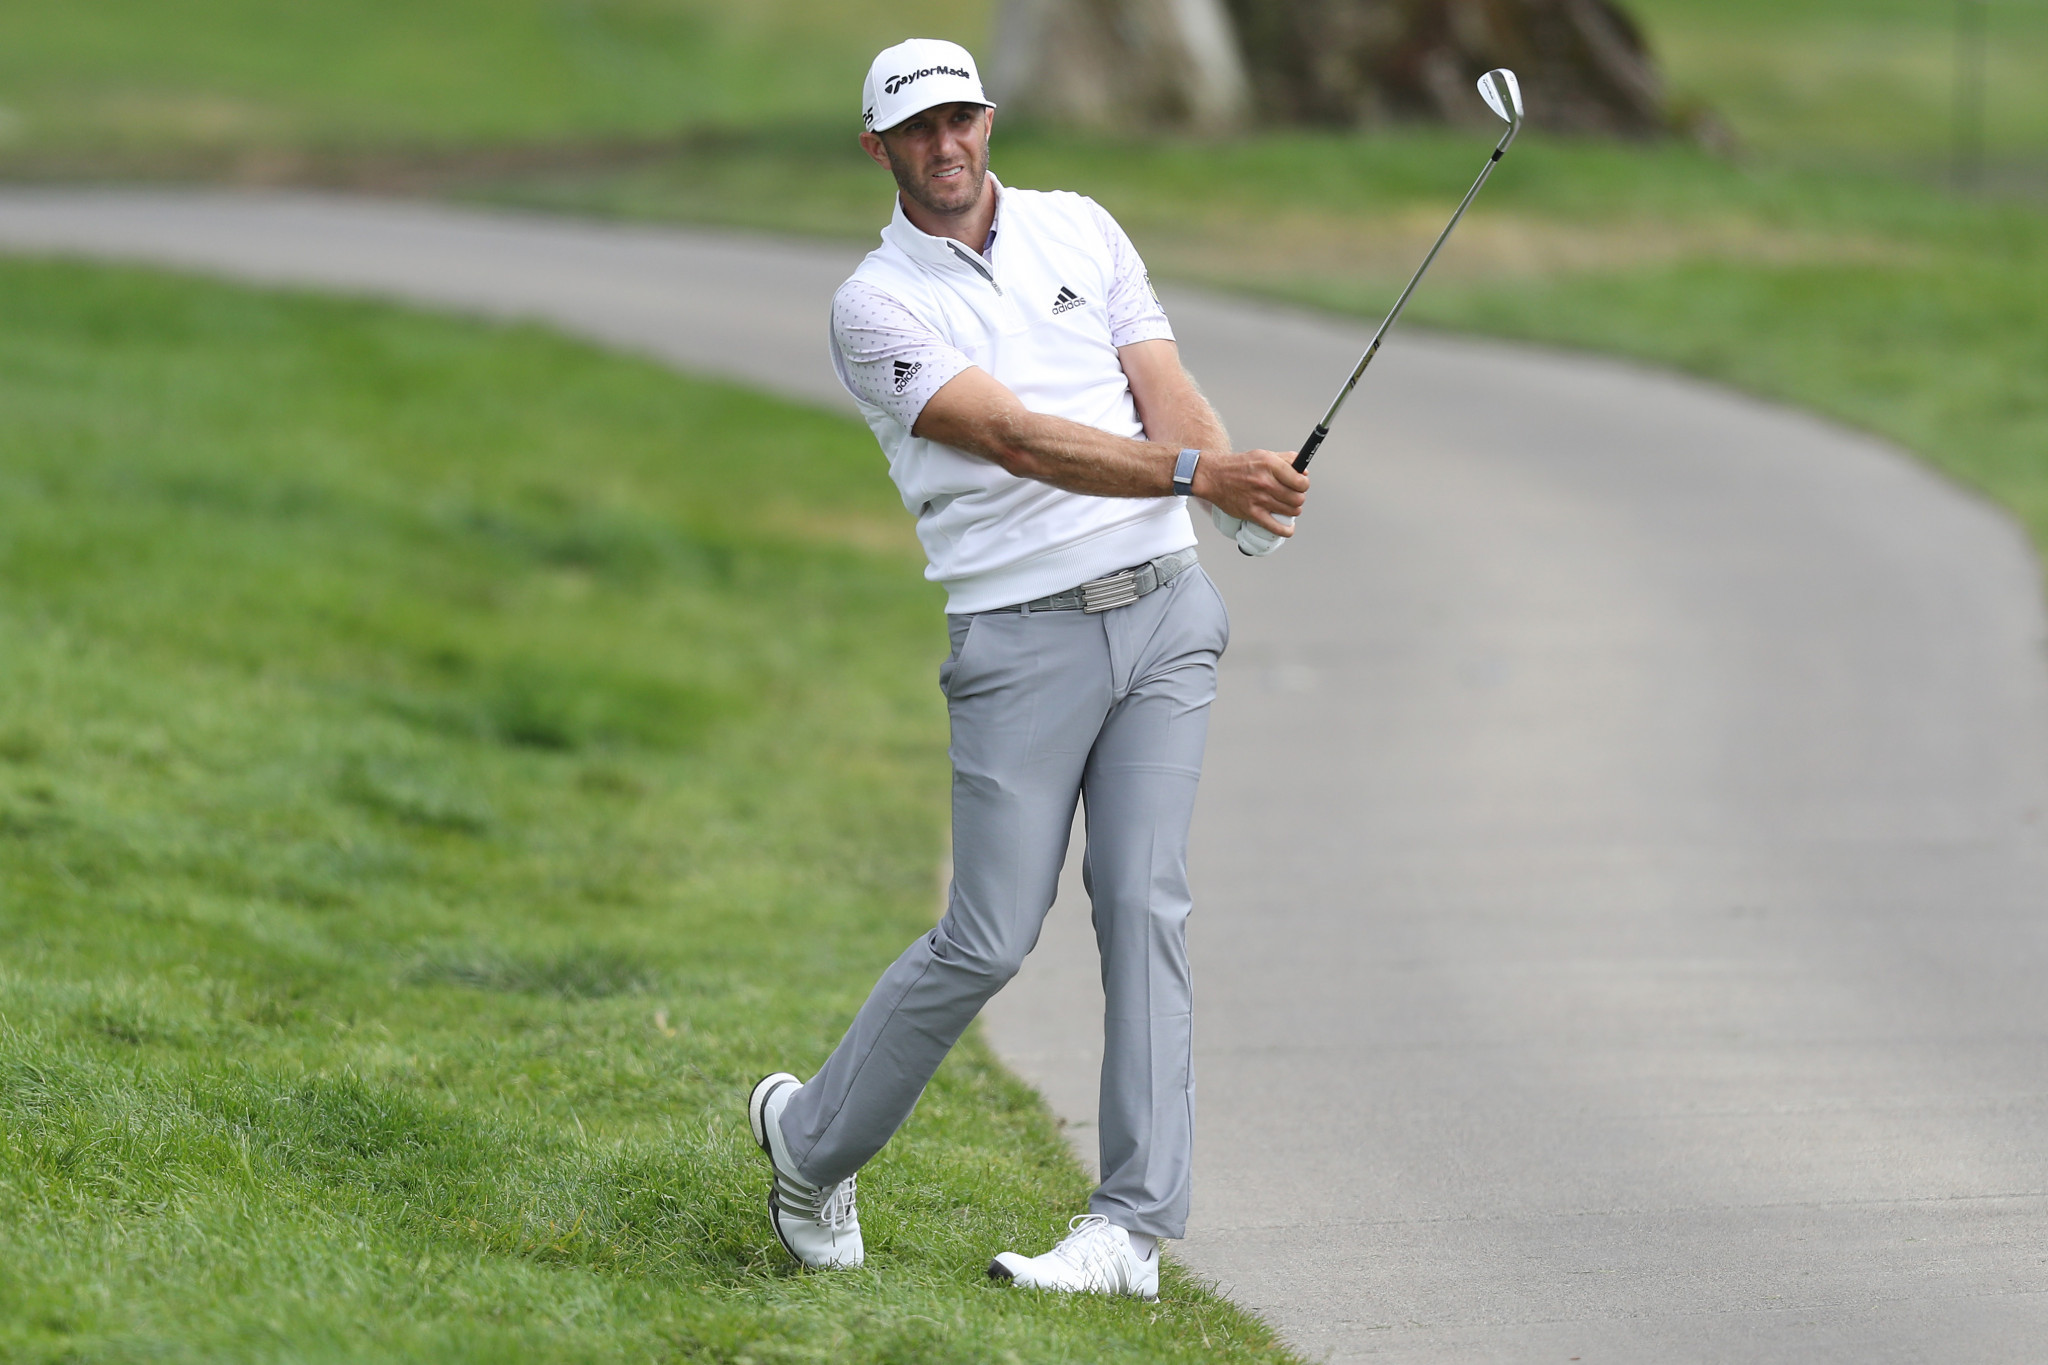 Dustin Johnson surged into the lead at the PGA Championship ©Getty Images